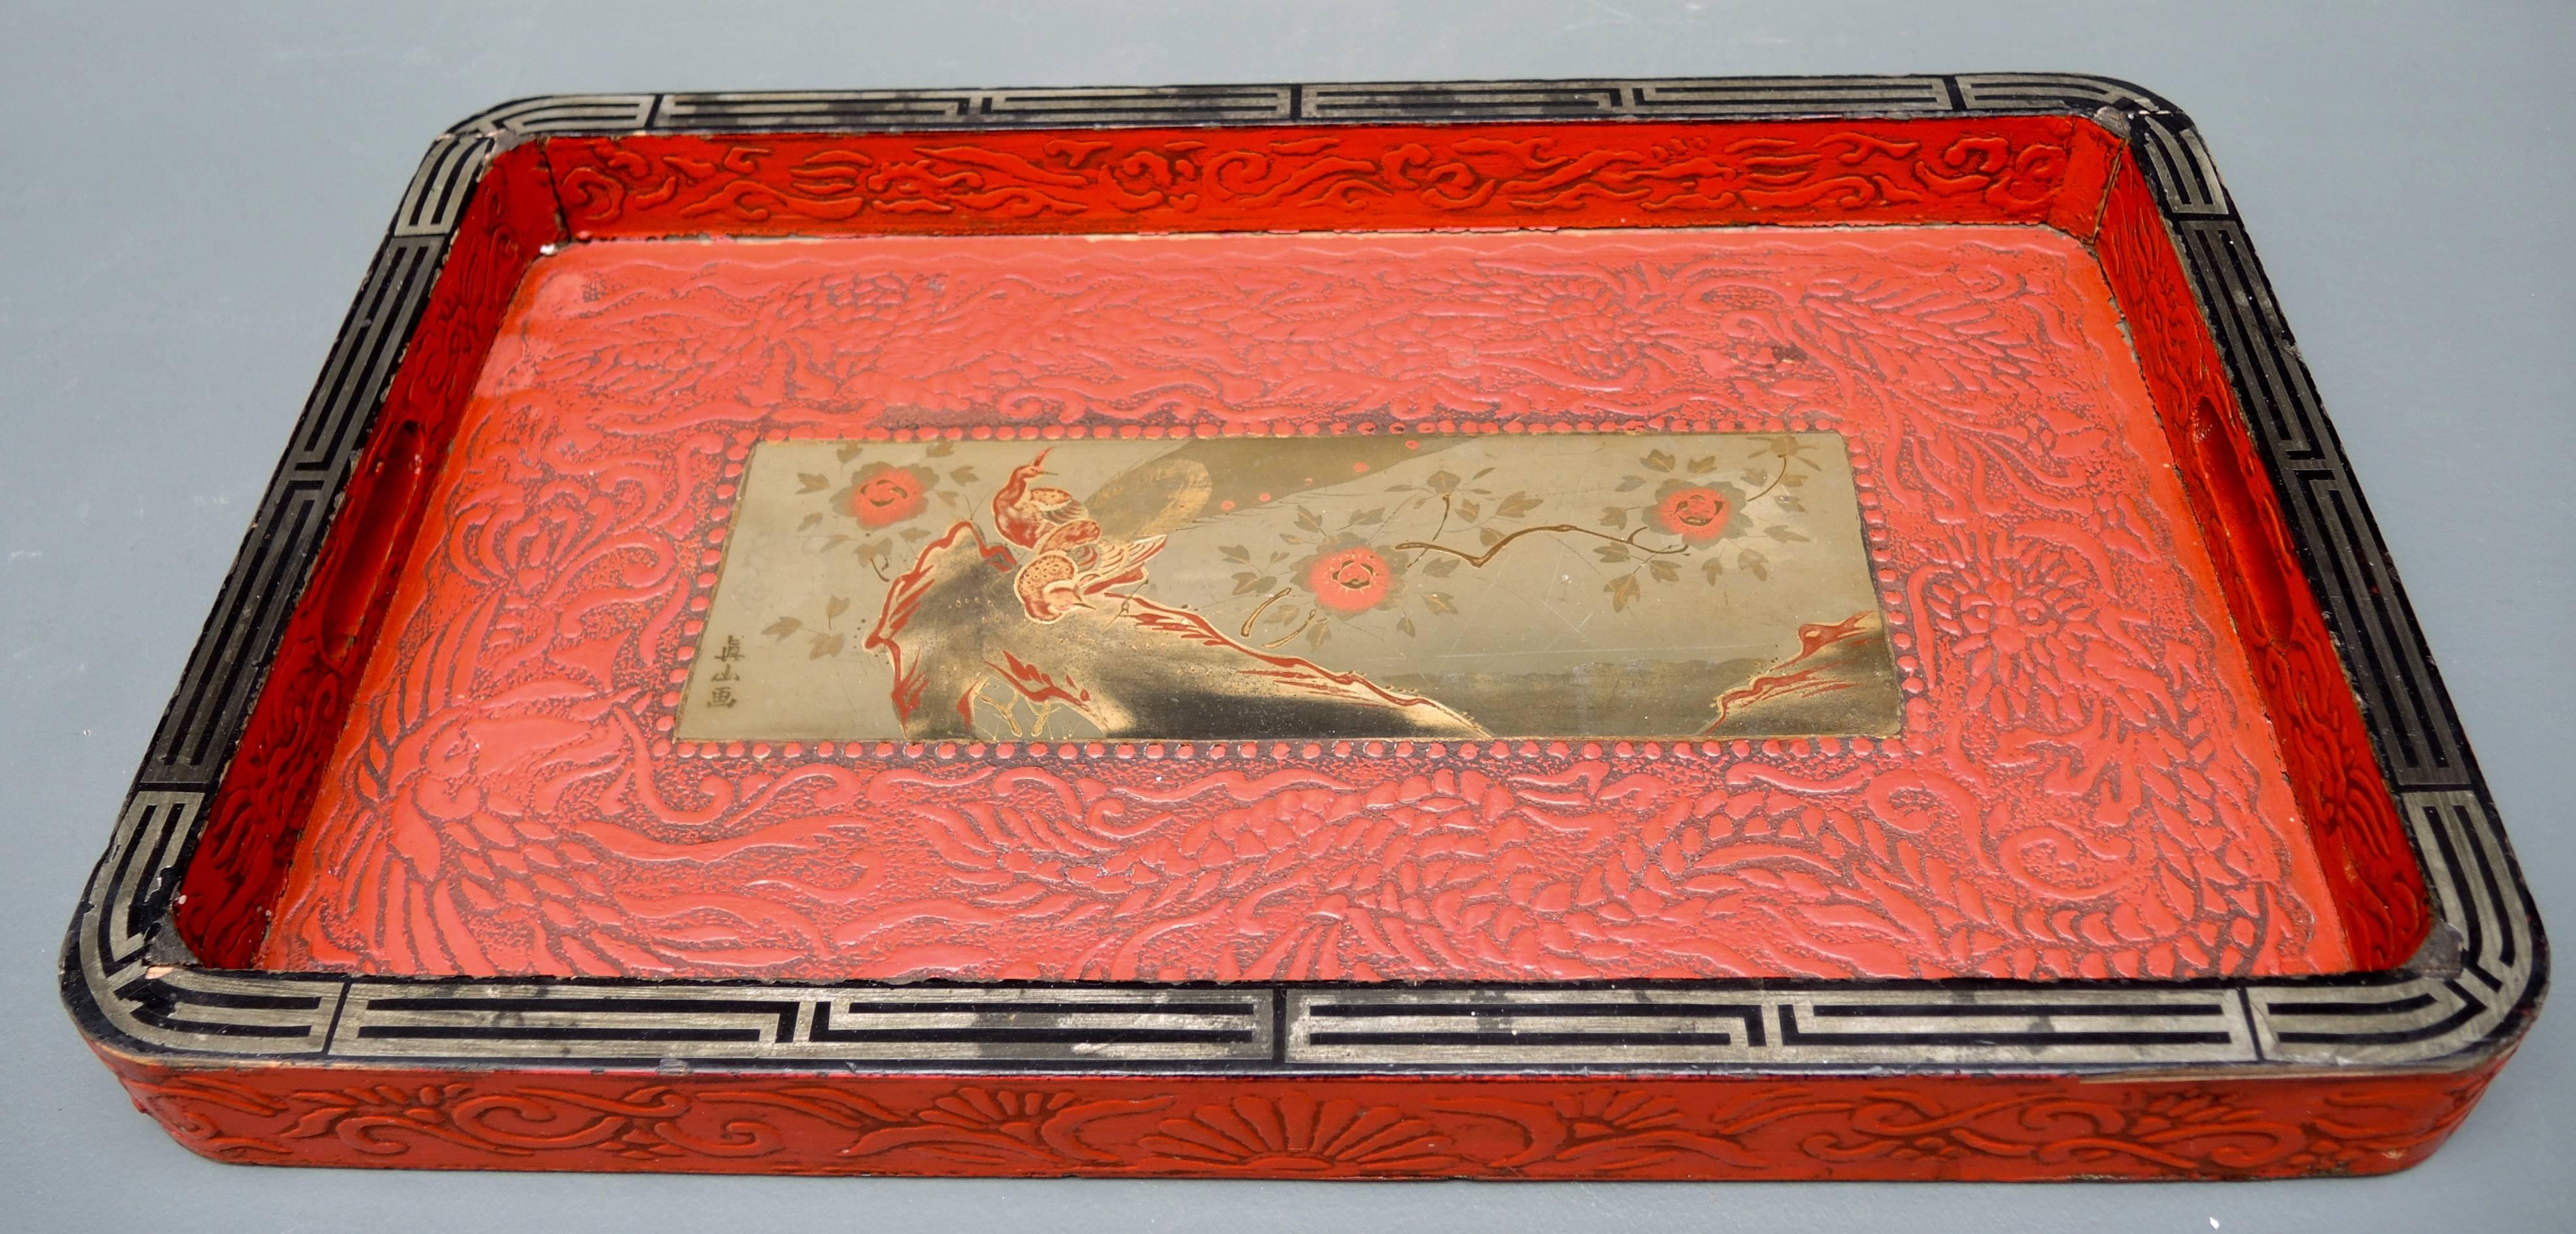 Beautiful Japanese tea tray of carved wood with lacquered surface.
The center has a beautiful painted lacquer-work and gold painted scene of a peacock on a branch. Signed by the artist center left side.